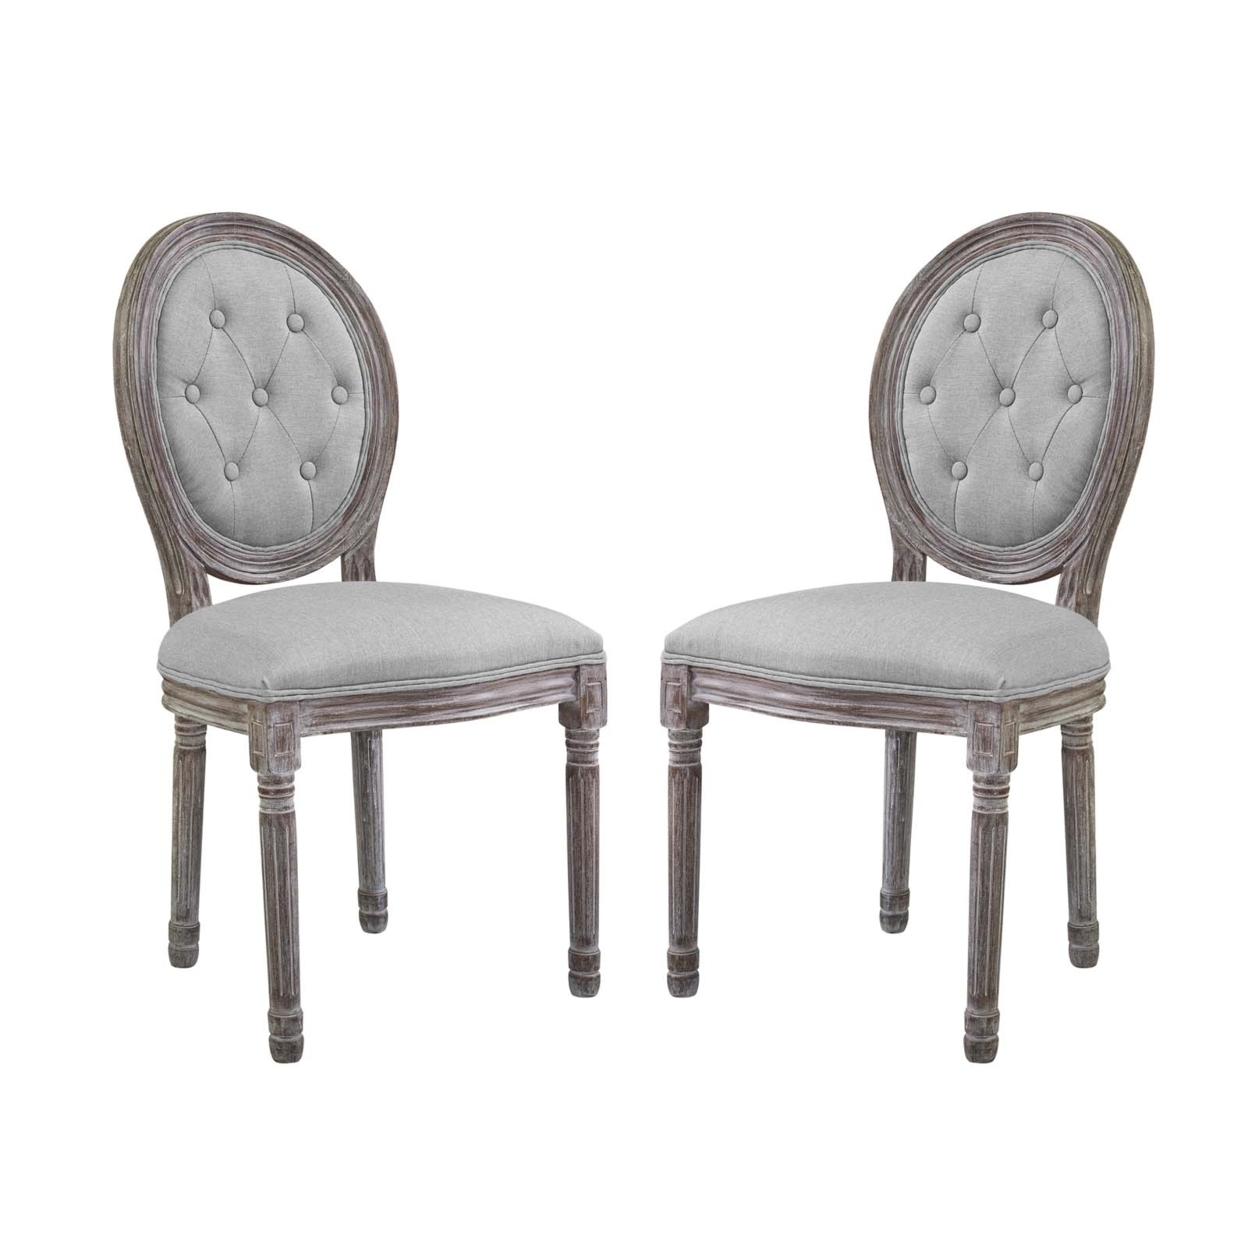 Arise Vintage French Upholstered Fabric Dining Side Chair Set Of 2,Light Gray